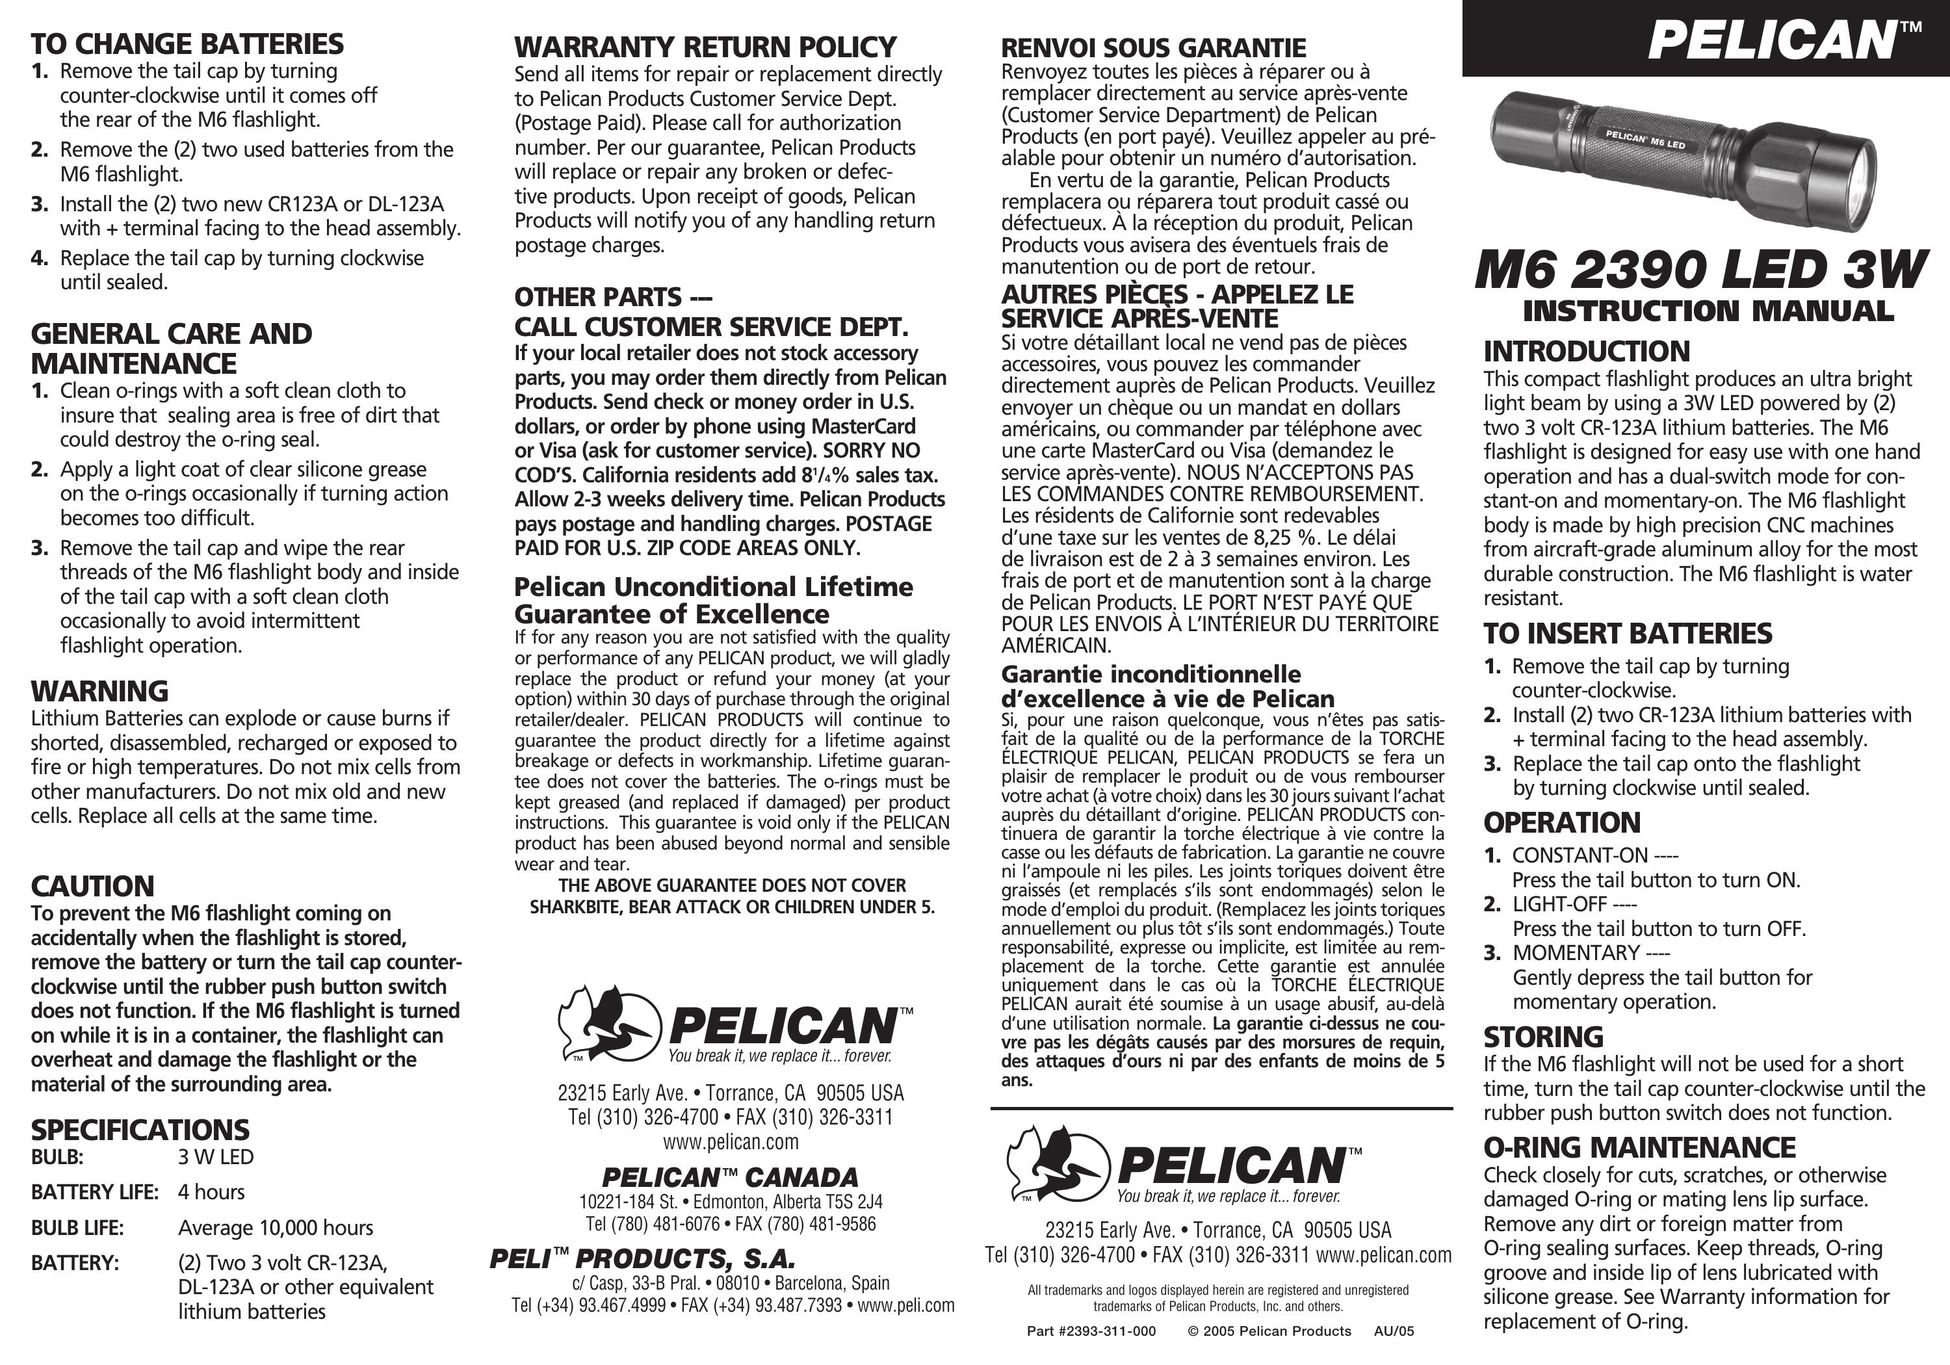 Pelican m6 2390 led 3w Home Safety Product User Manual